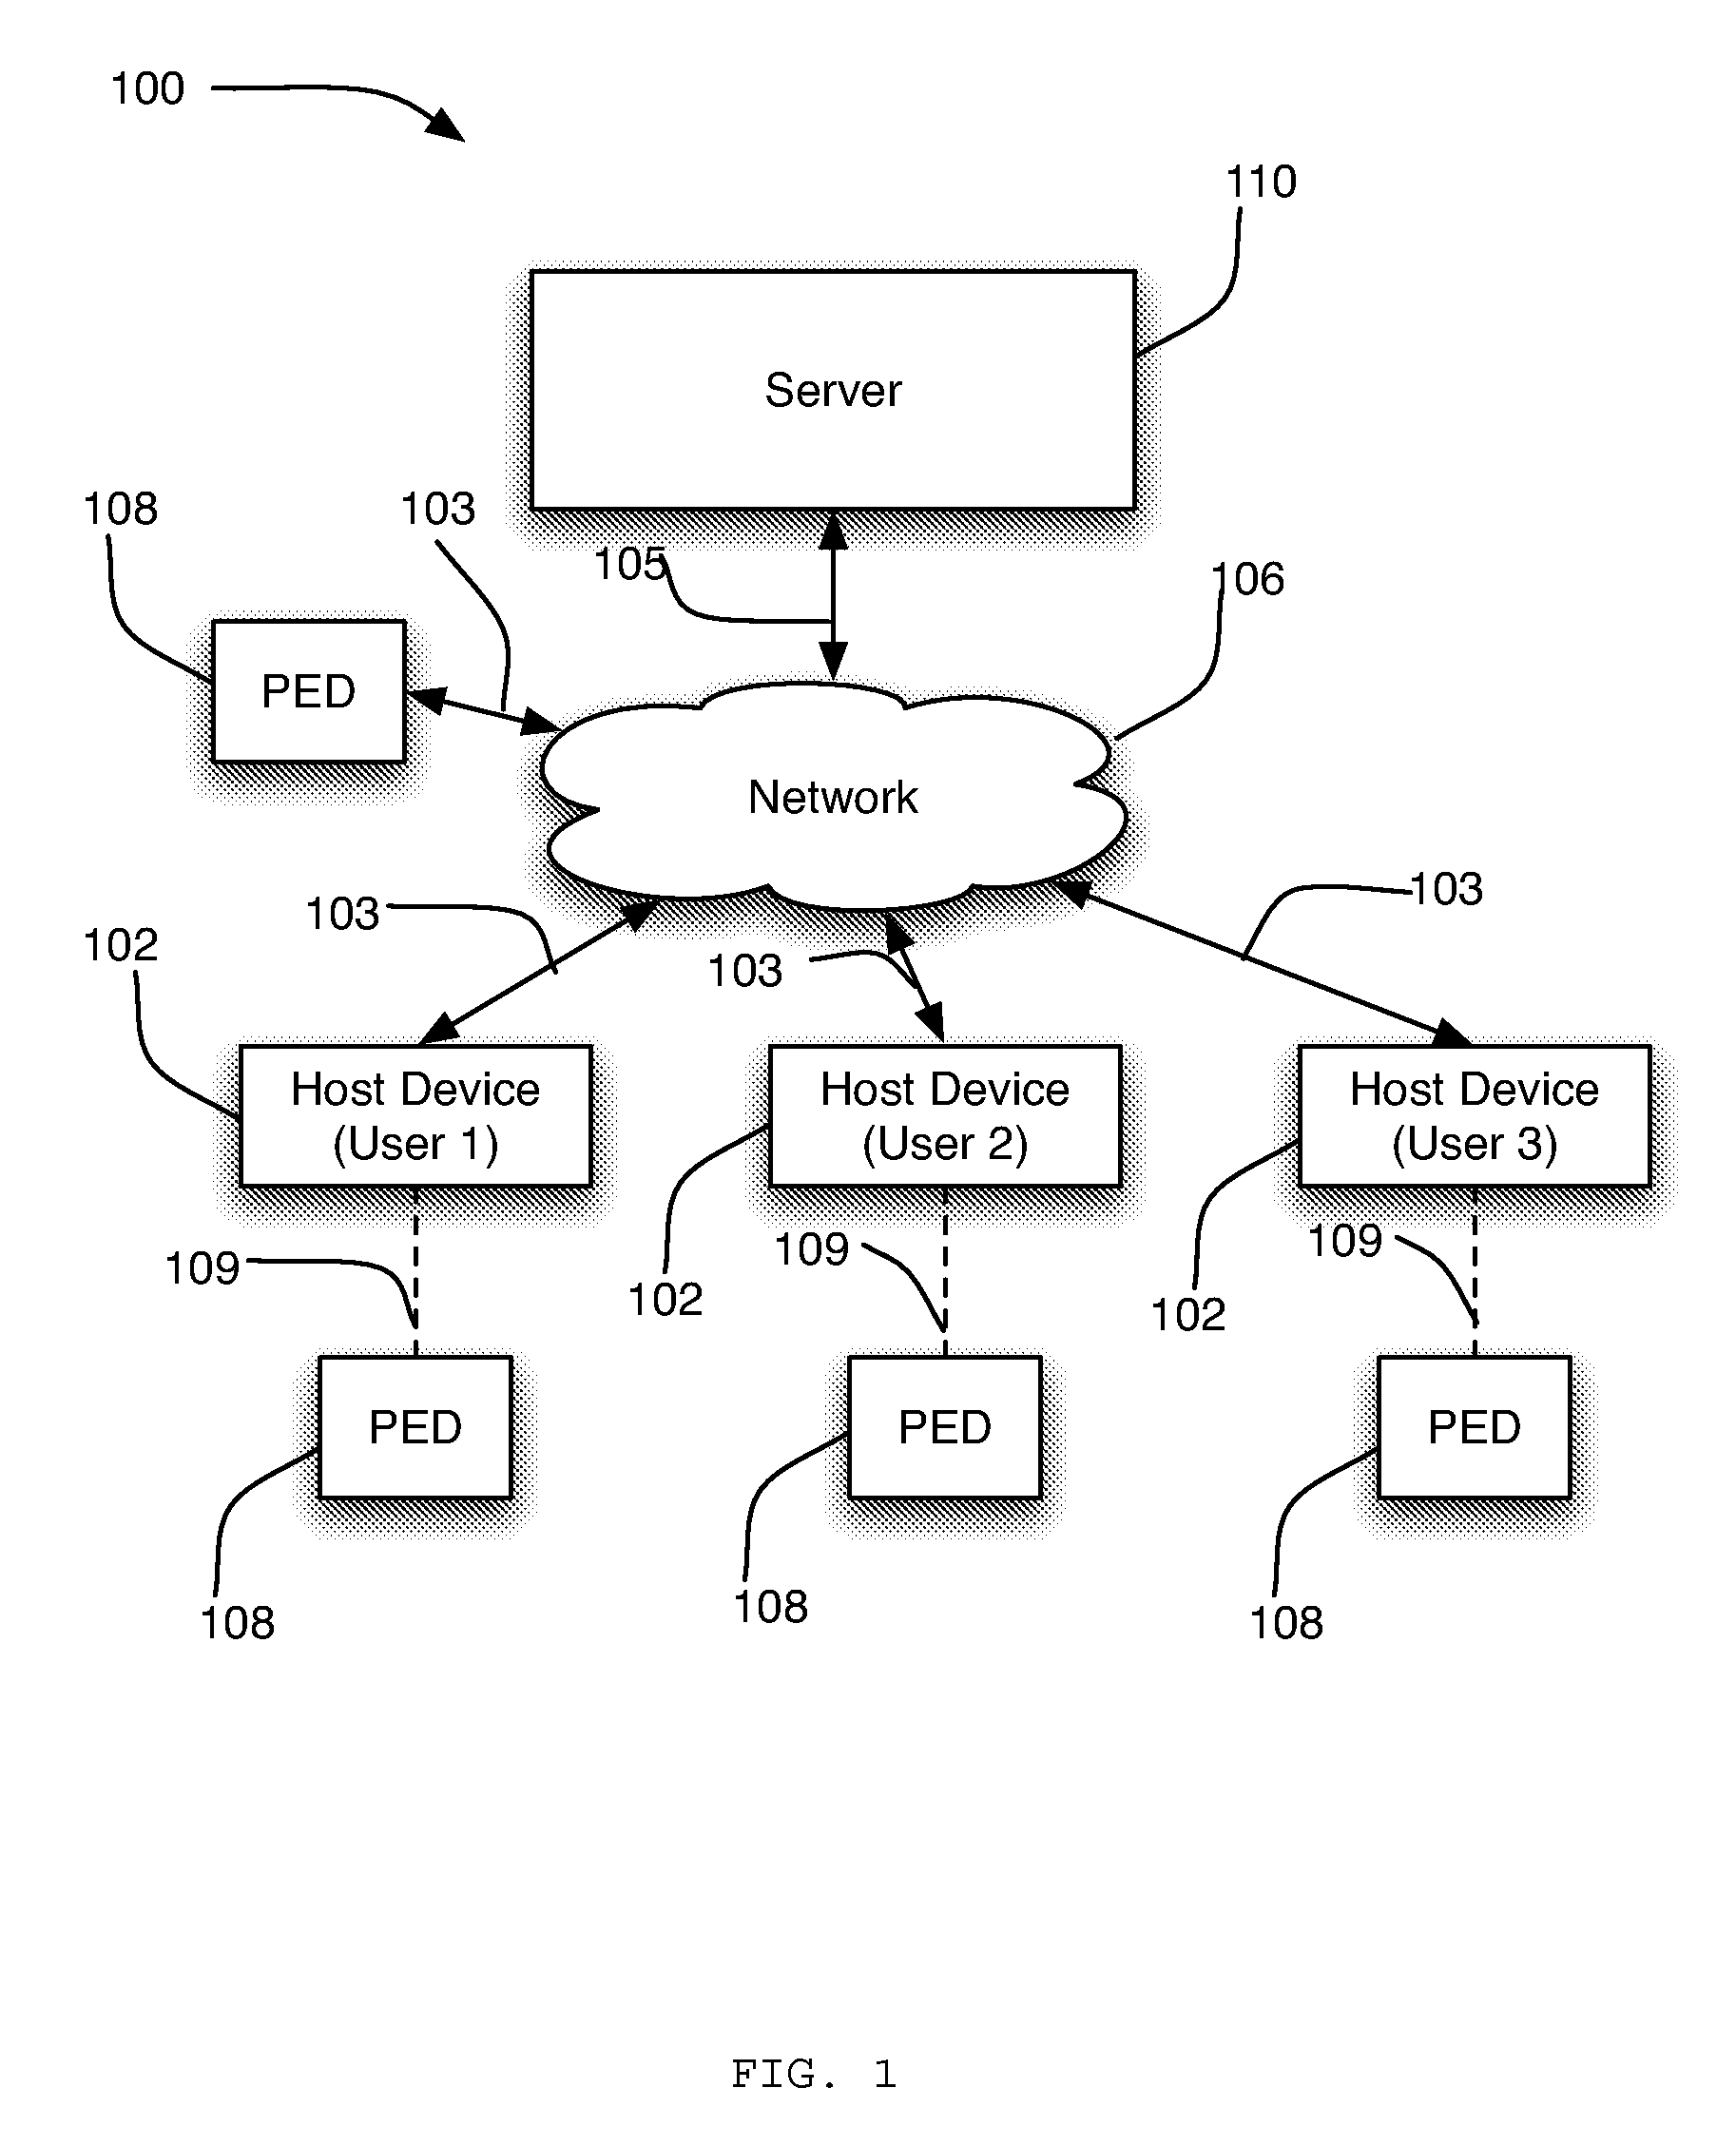 Systems and methods for determining the language to use for speech generated by a text to speech engine